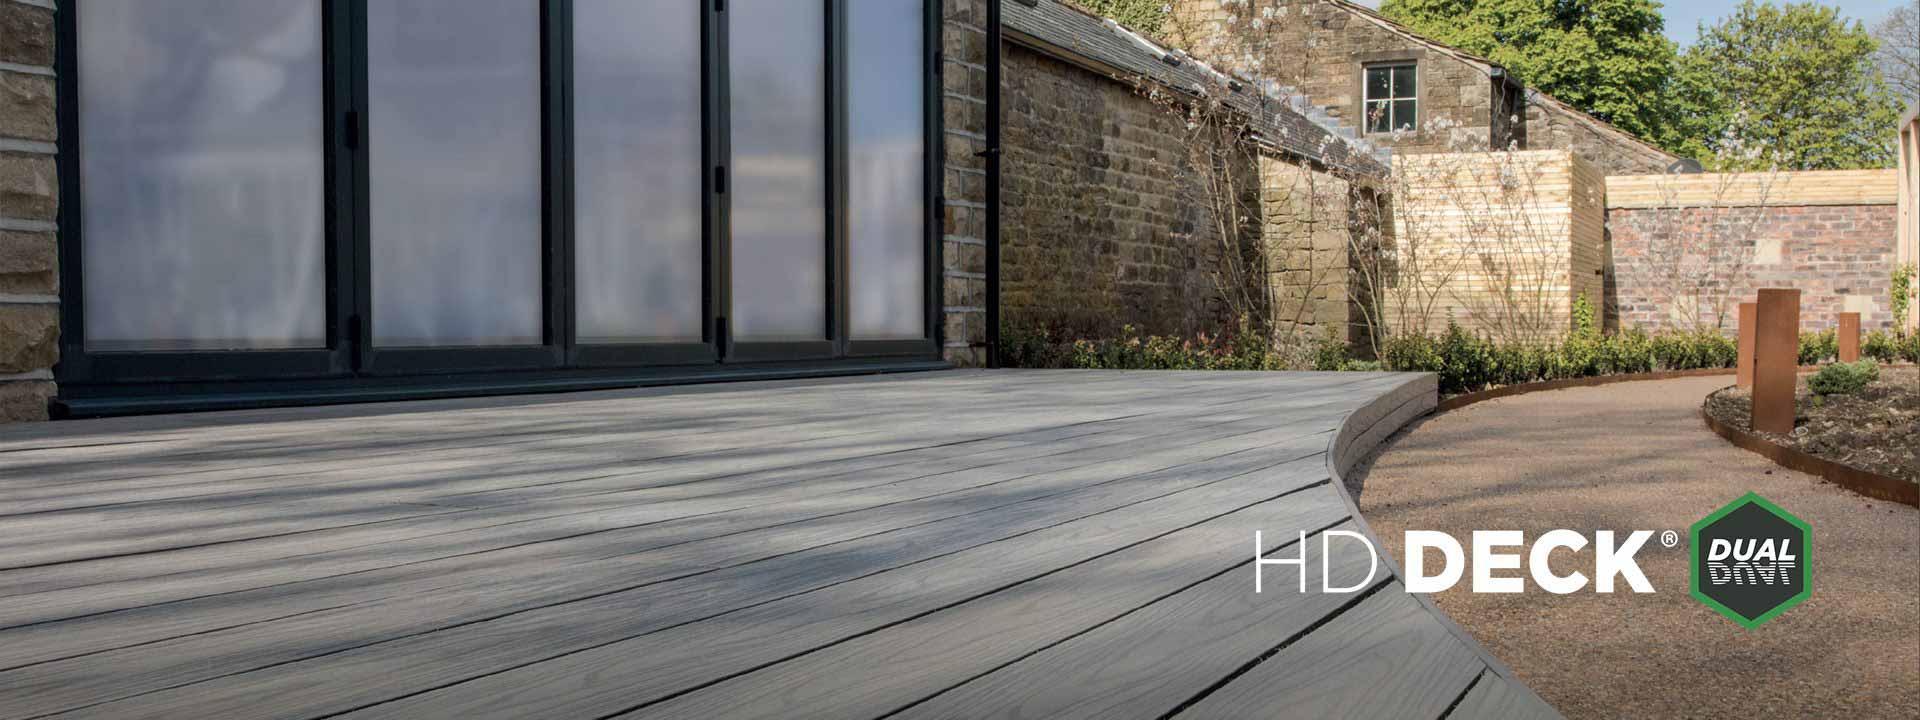 HD Deck Dual, composite decking from Composite Prime